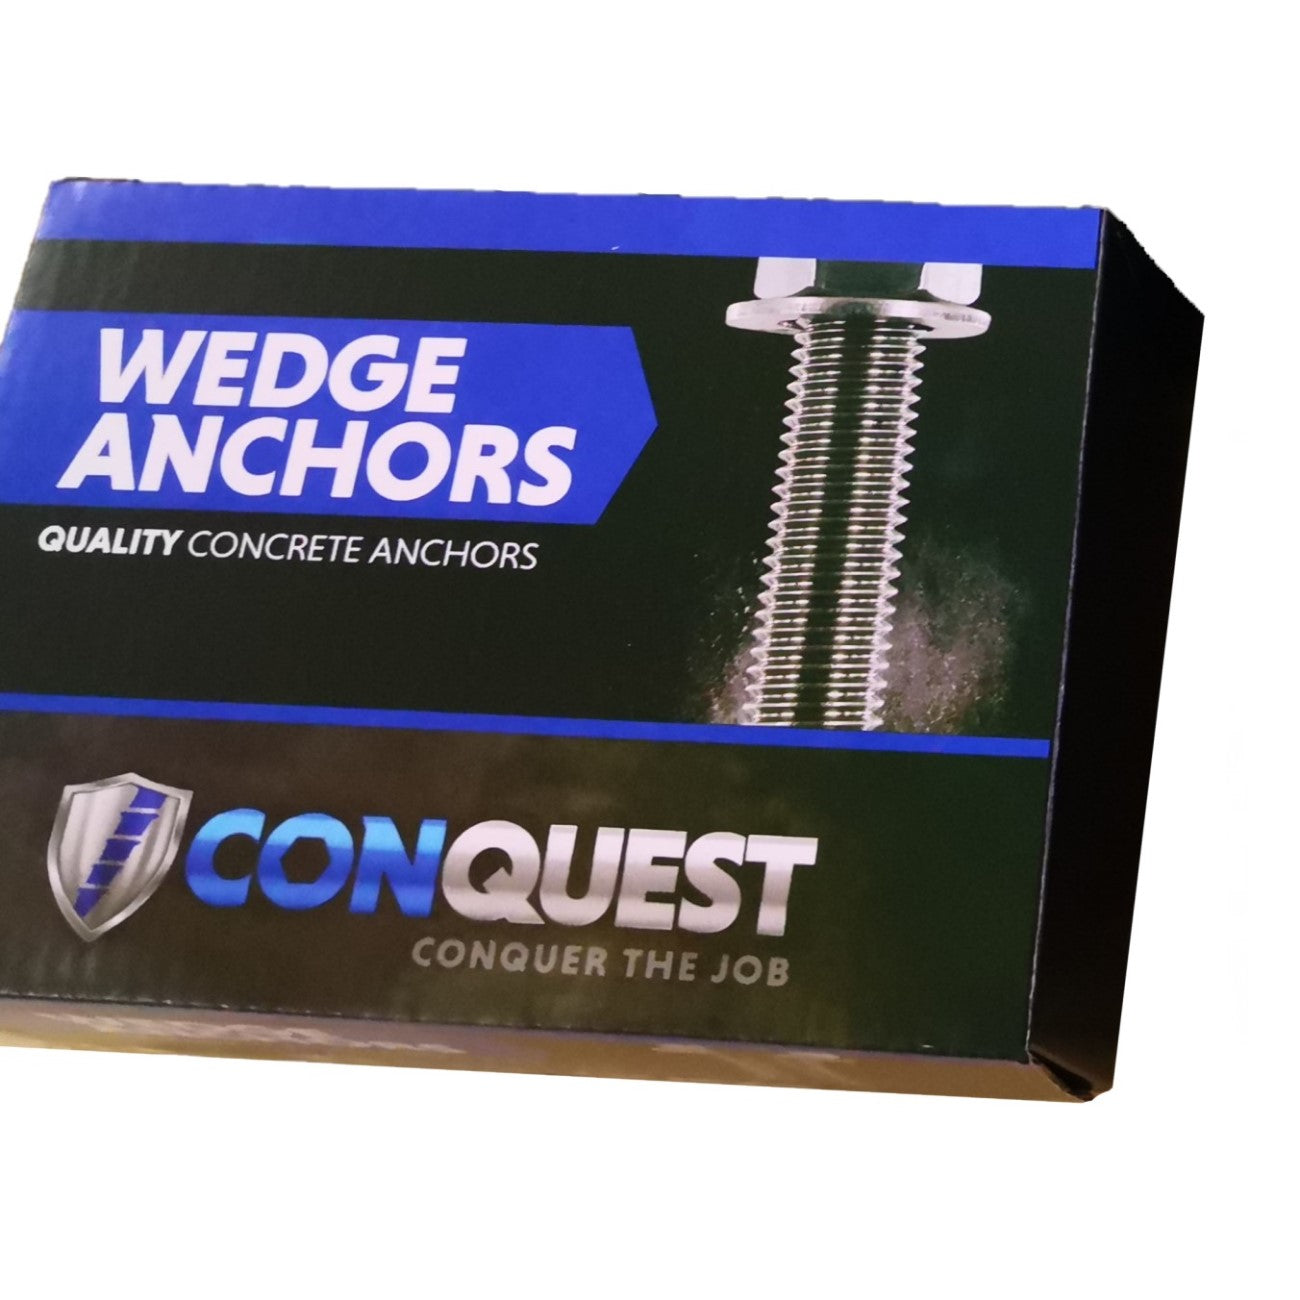 5/8" x 6" Conquest Wedge Anchors - 316 Stainless Steel, Pkg 25